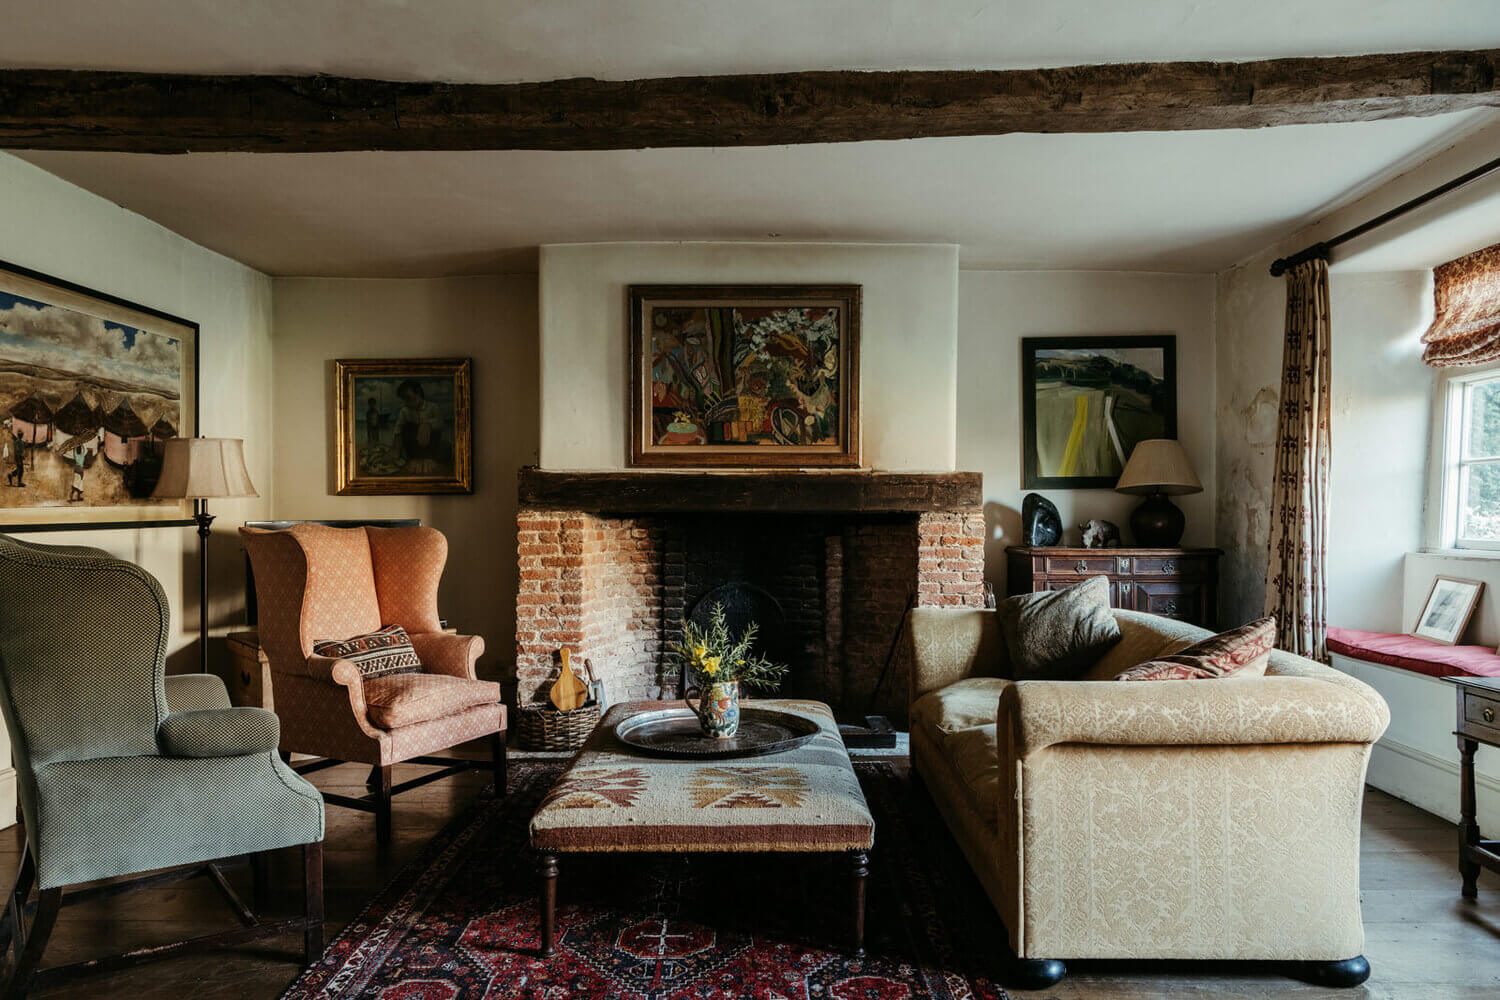 HunstonManorHouseARenovated17th CenturyPropertyinWestSussex TheNordroom4 Hunston Manor House: A Renovated 17th-Century Property in West Sussex